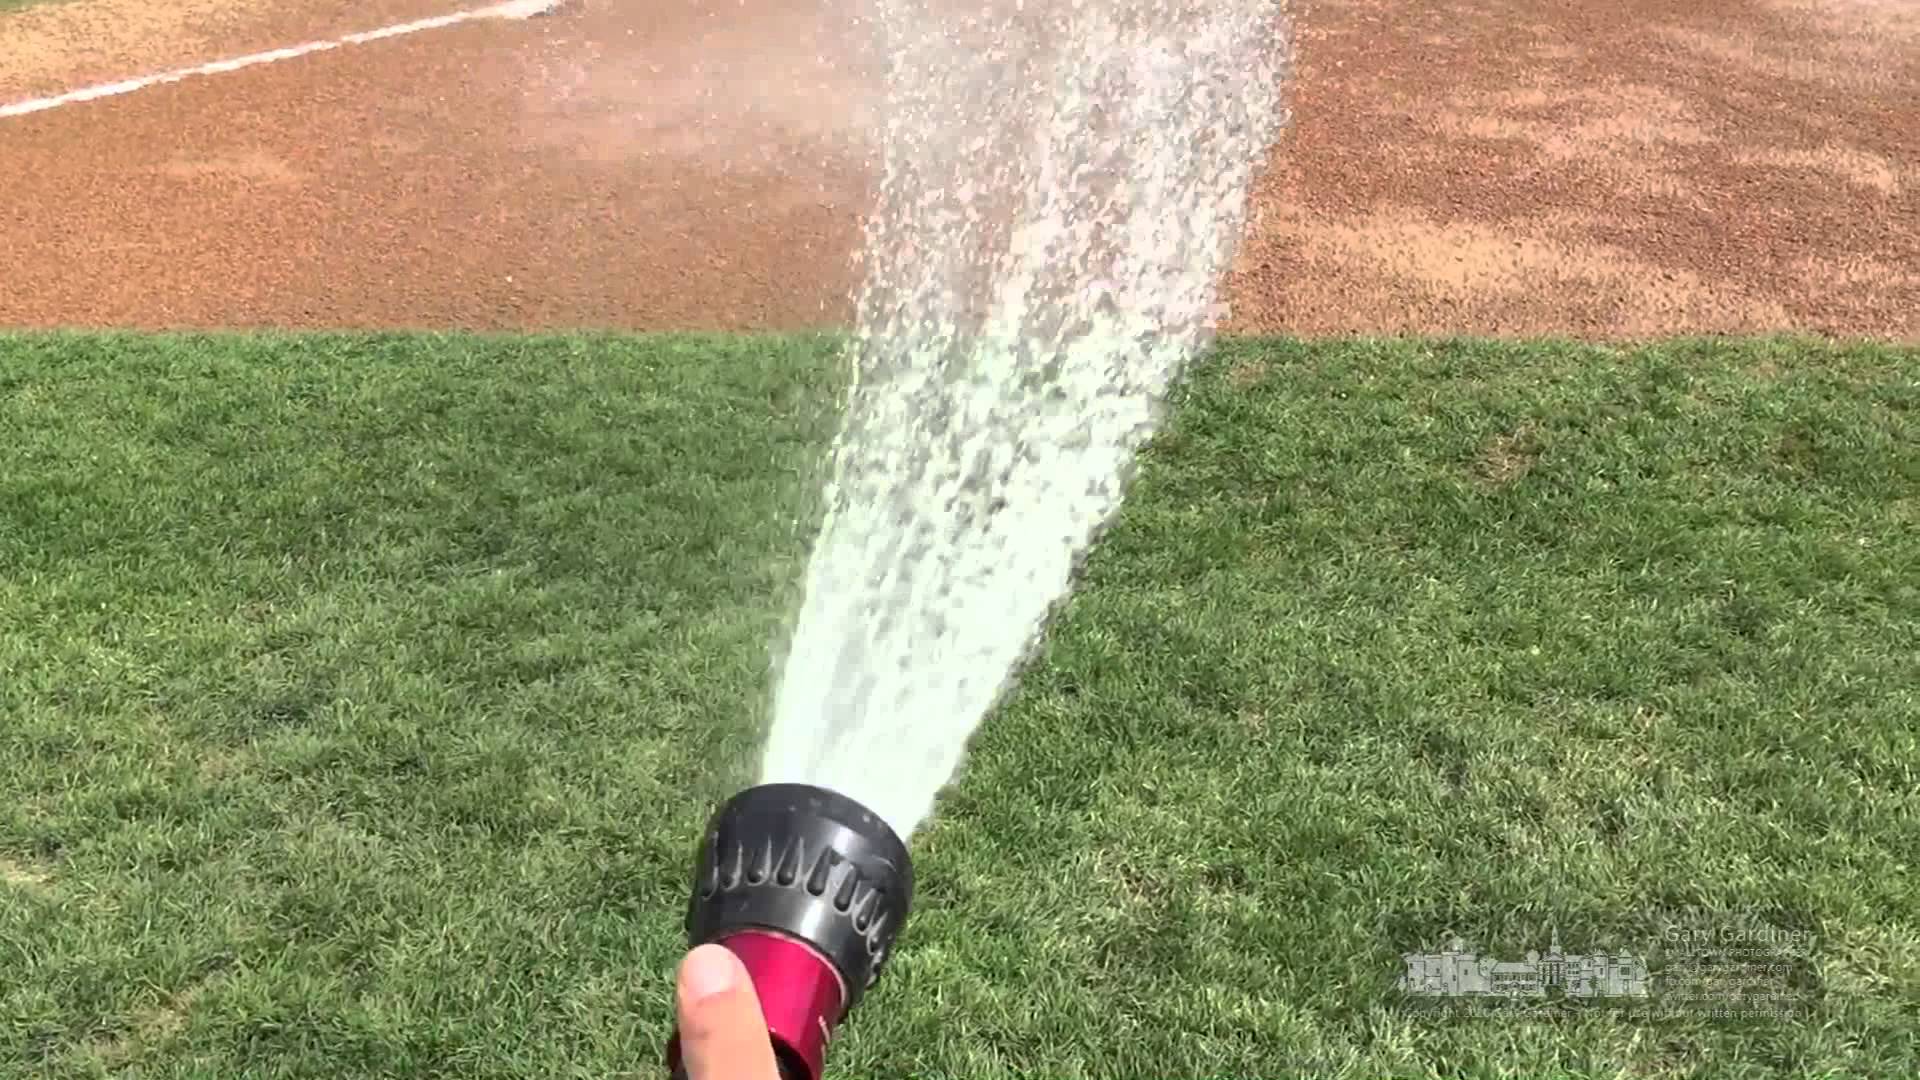 Watering the baseball field at Otterbein - March 23, 2016 - YouTube